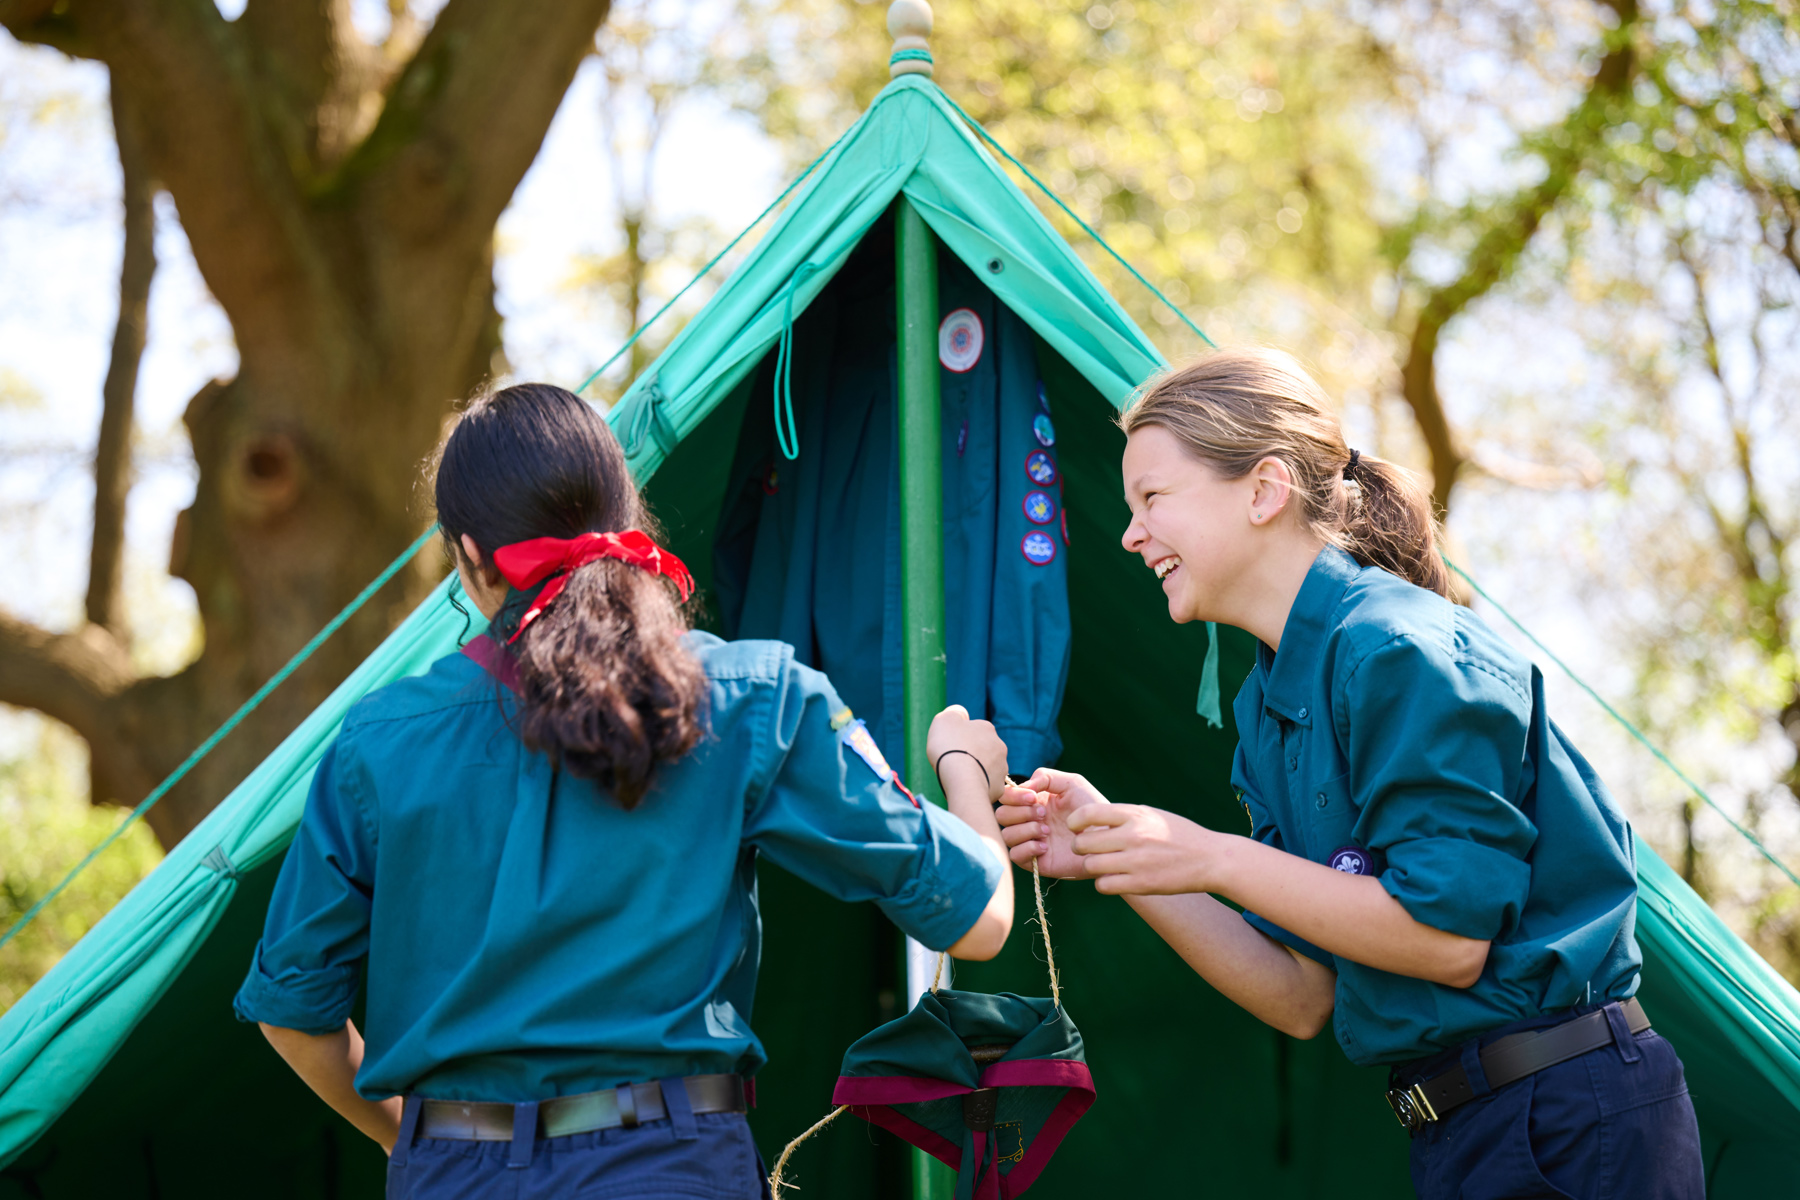 Two scouts putting up a patrol tent wearing their uniforms